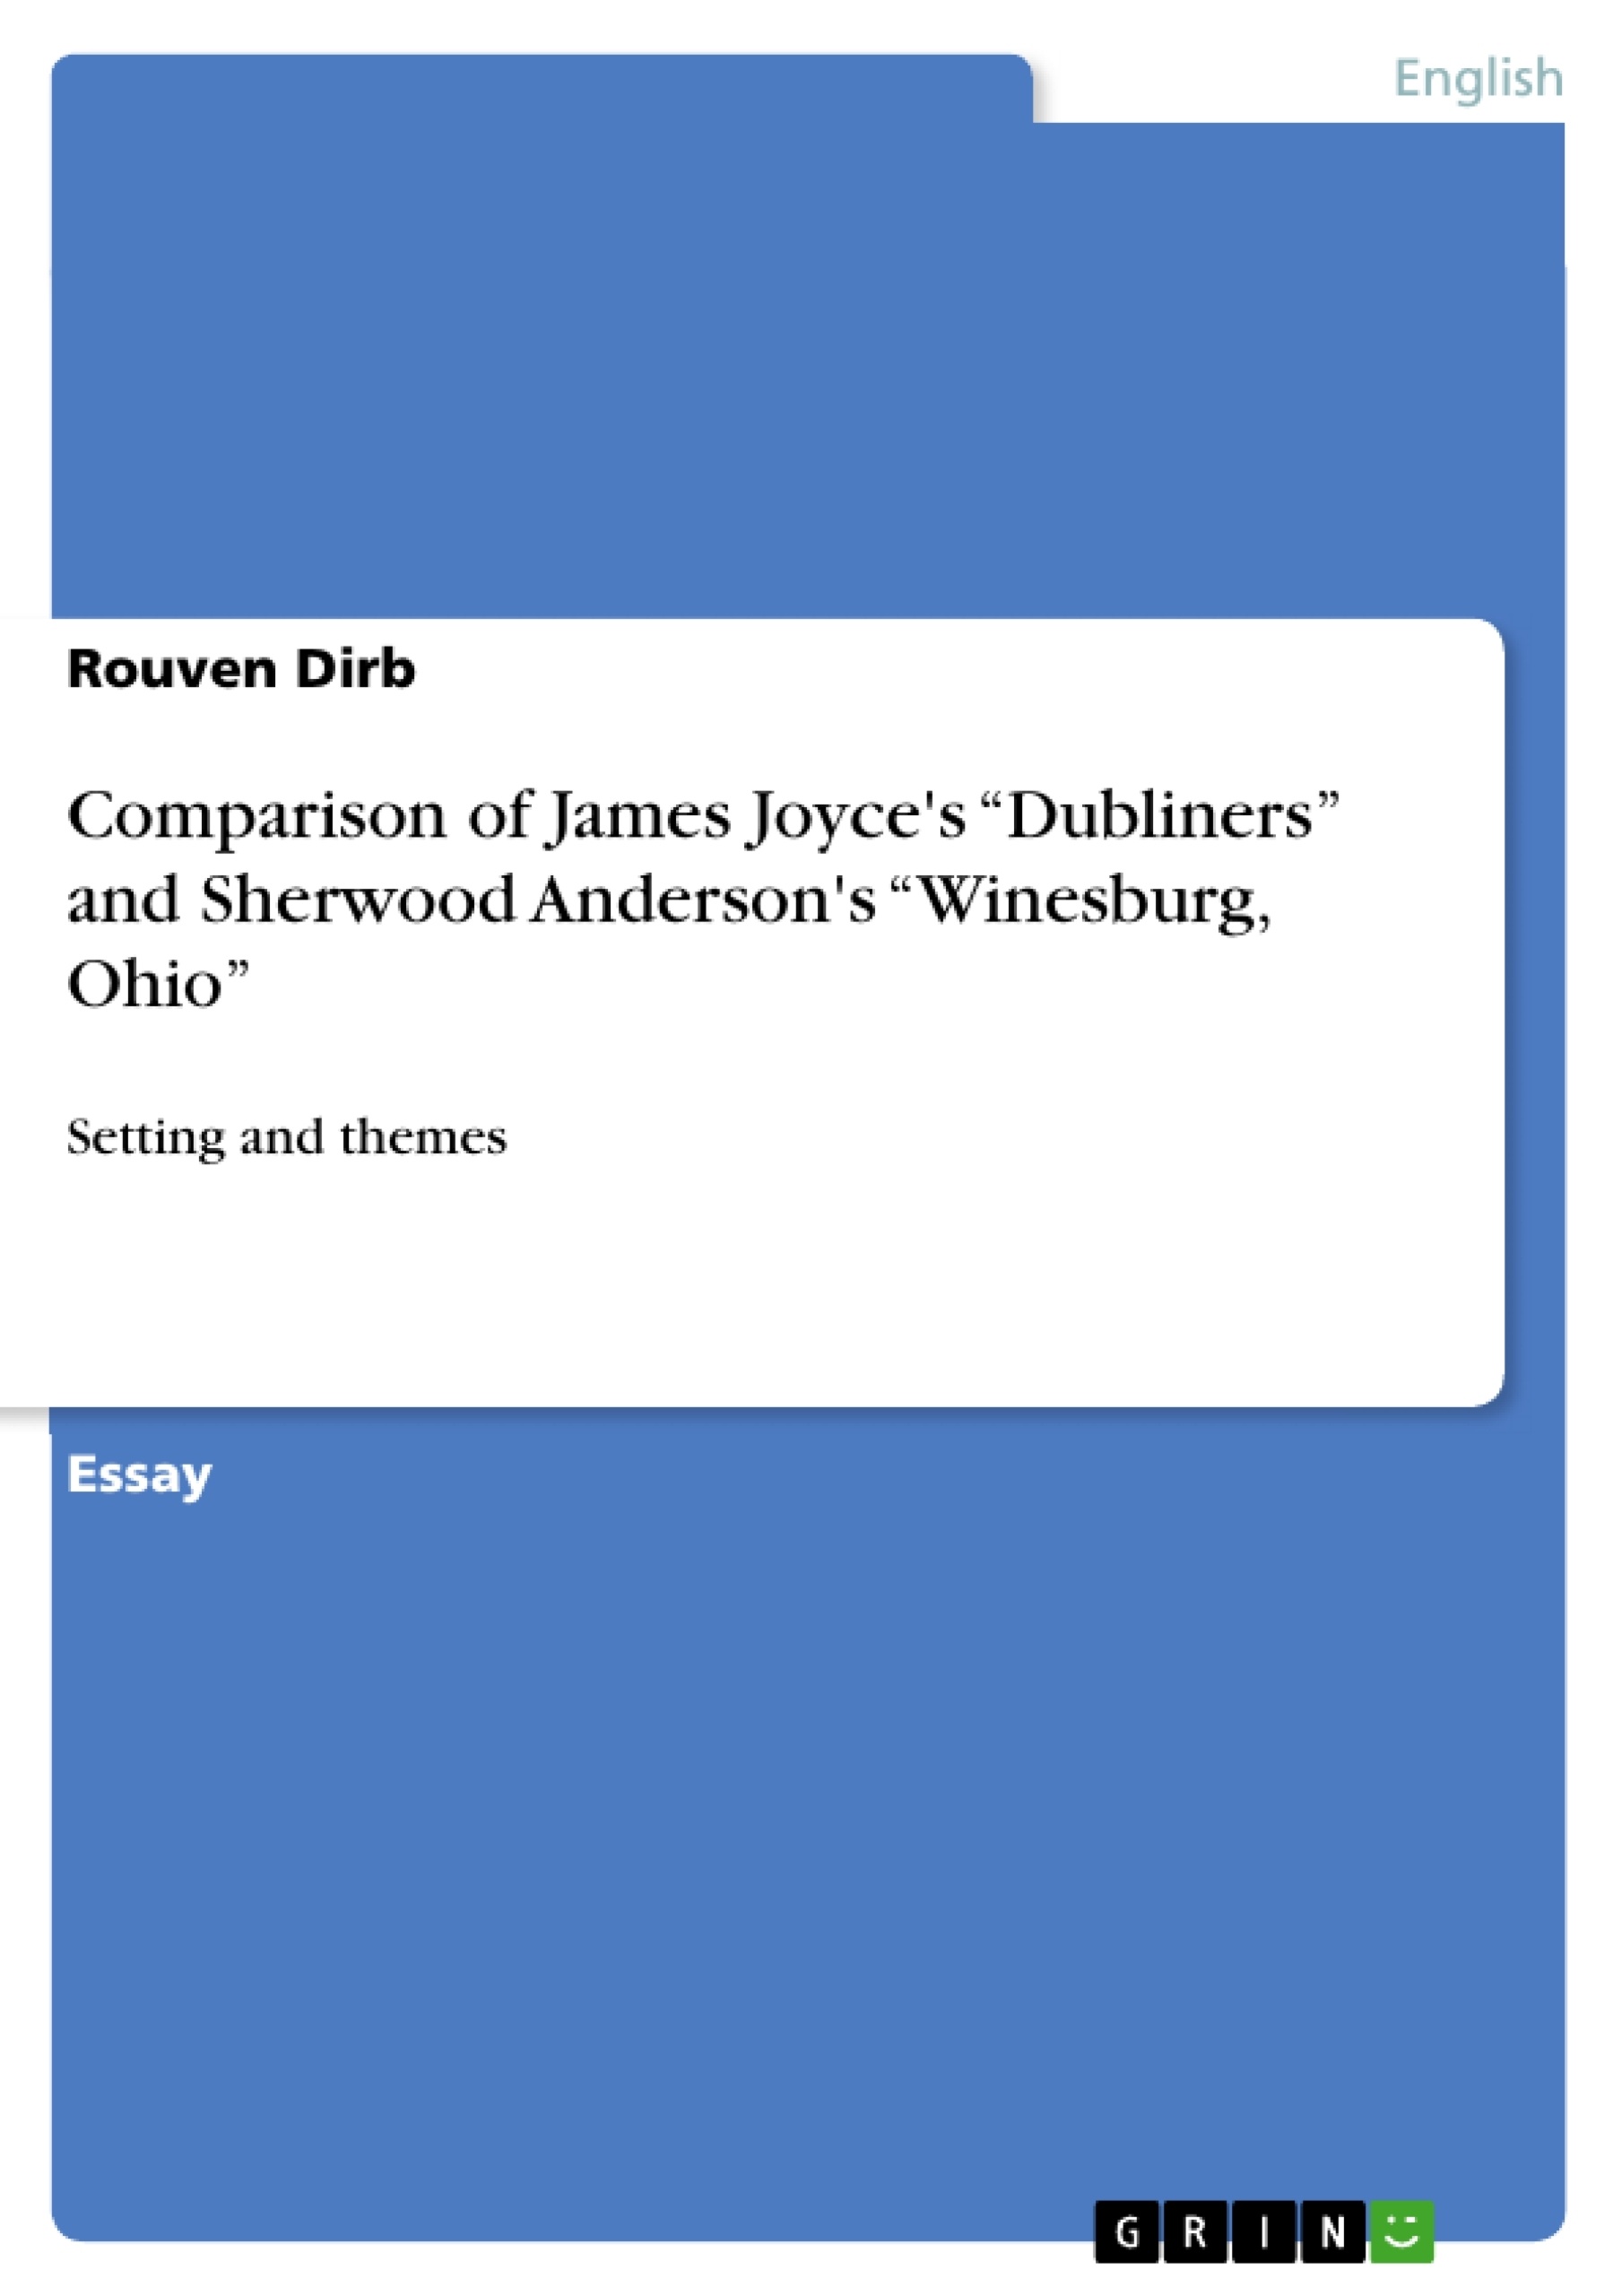 Title: Comparison of James Joyce's “Dubliners” and Sherwood Anderson's “Winesburg, Ohio”